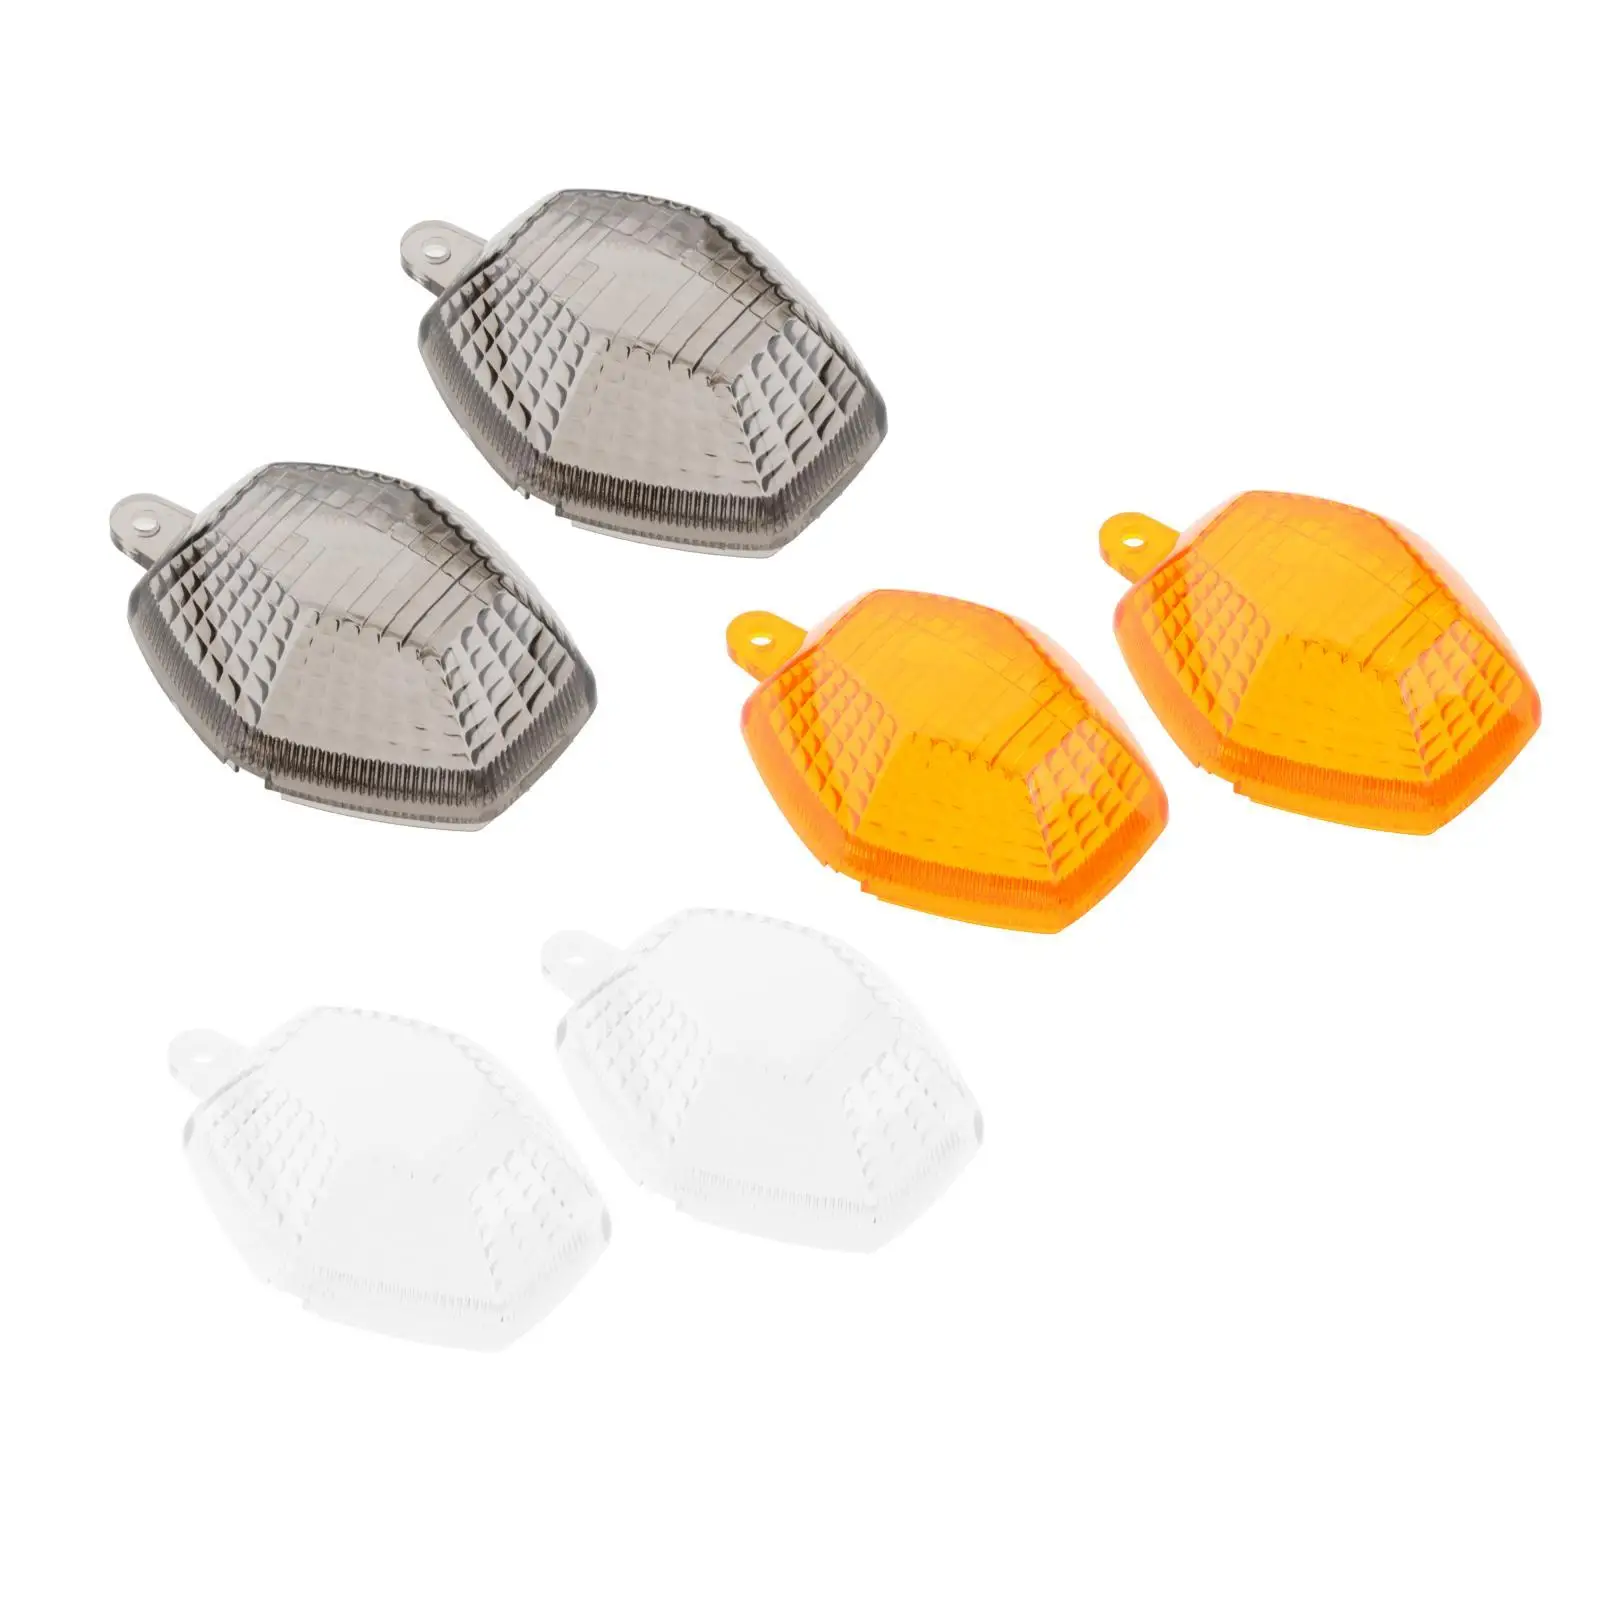  light type lens ,Motorcycle Parts, Motorcycle Accessories, Indicator Lamp Cover, Fit for  Gsf 1200 N/1-2006